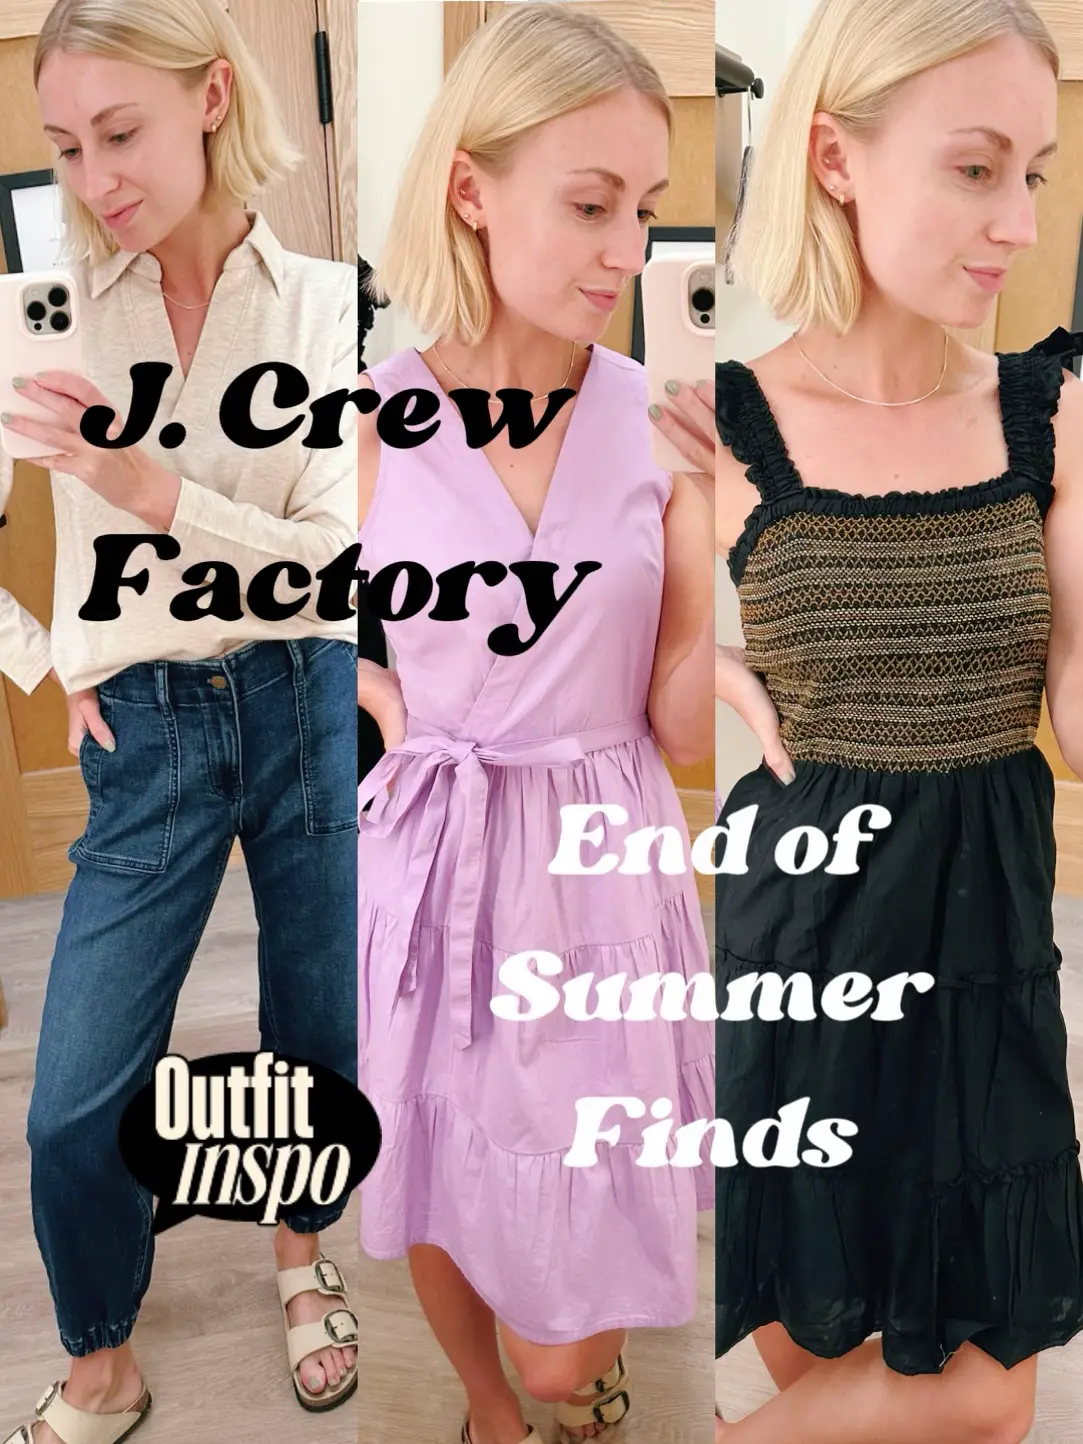 J Crew Factory Fall Finds Just Released